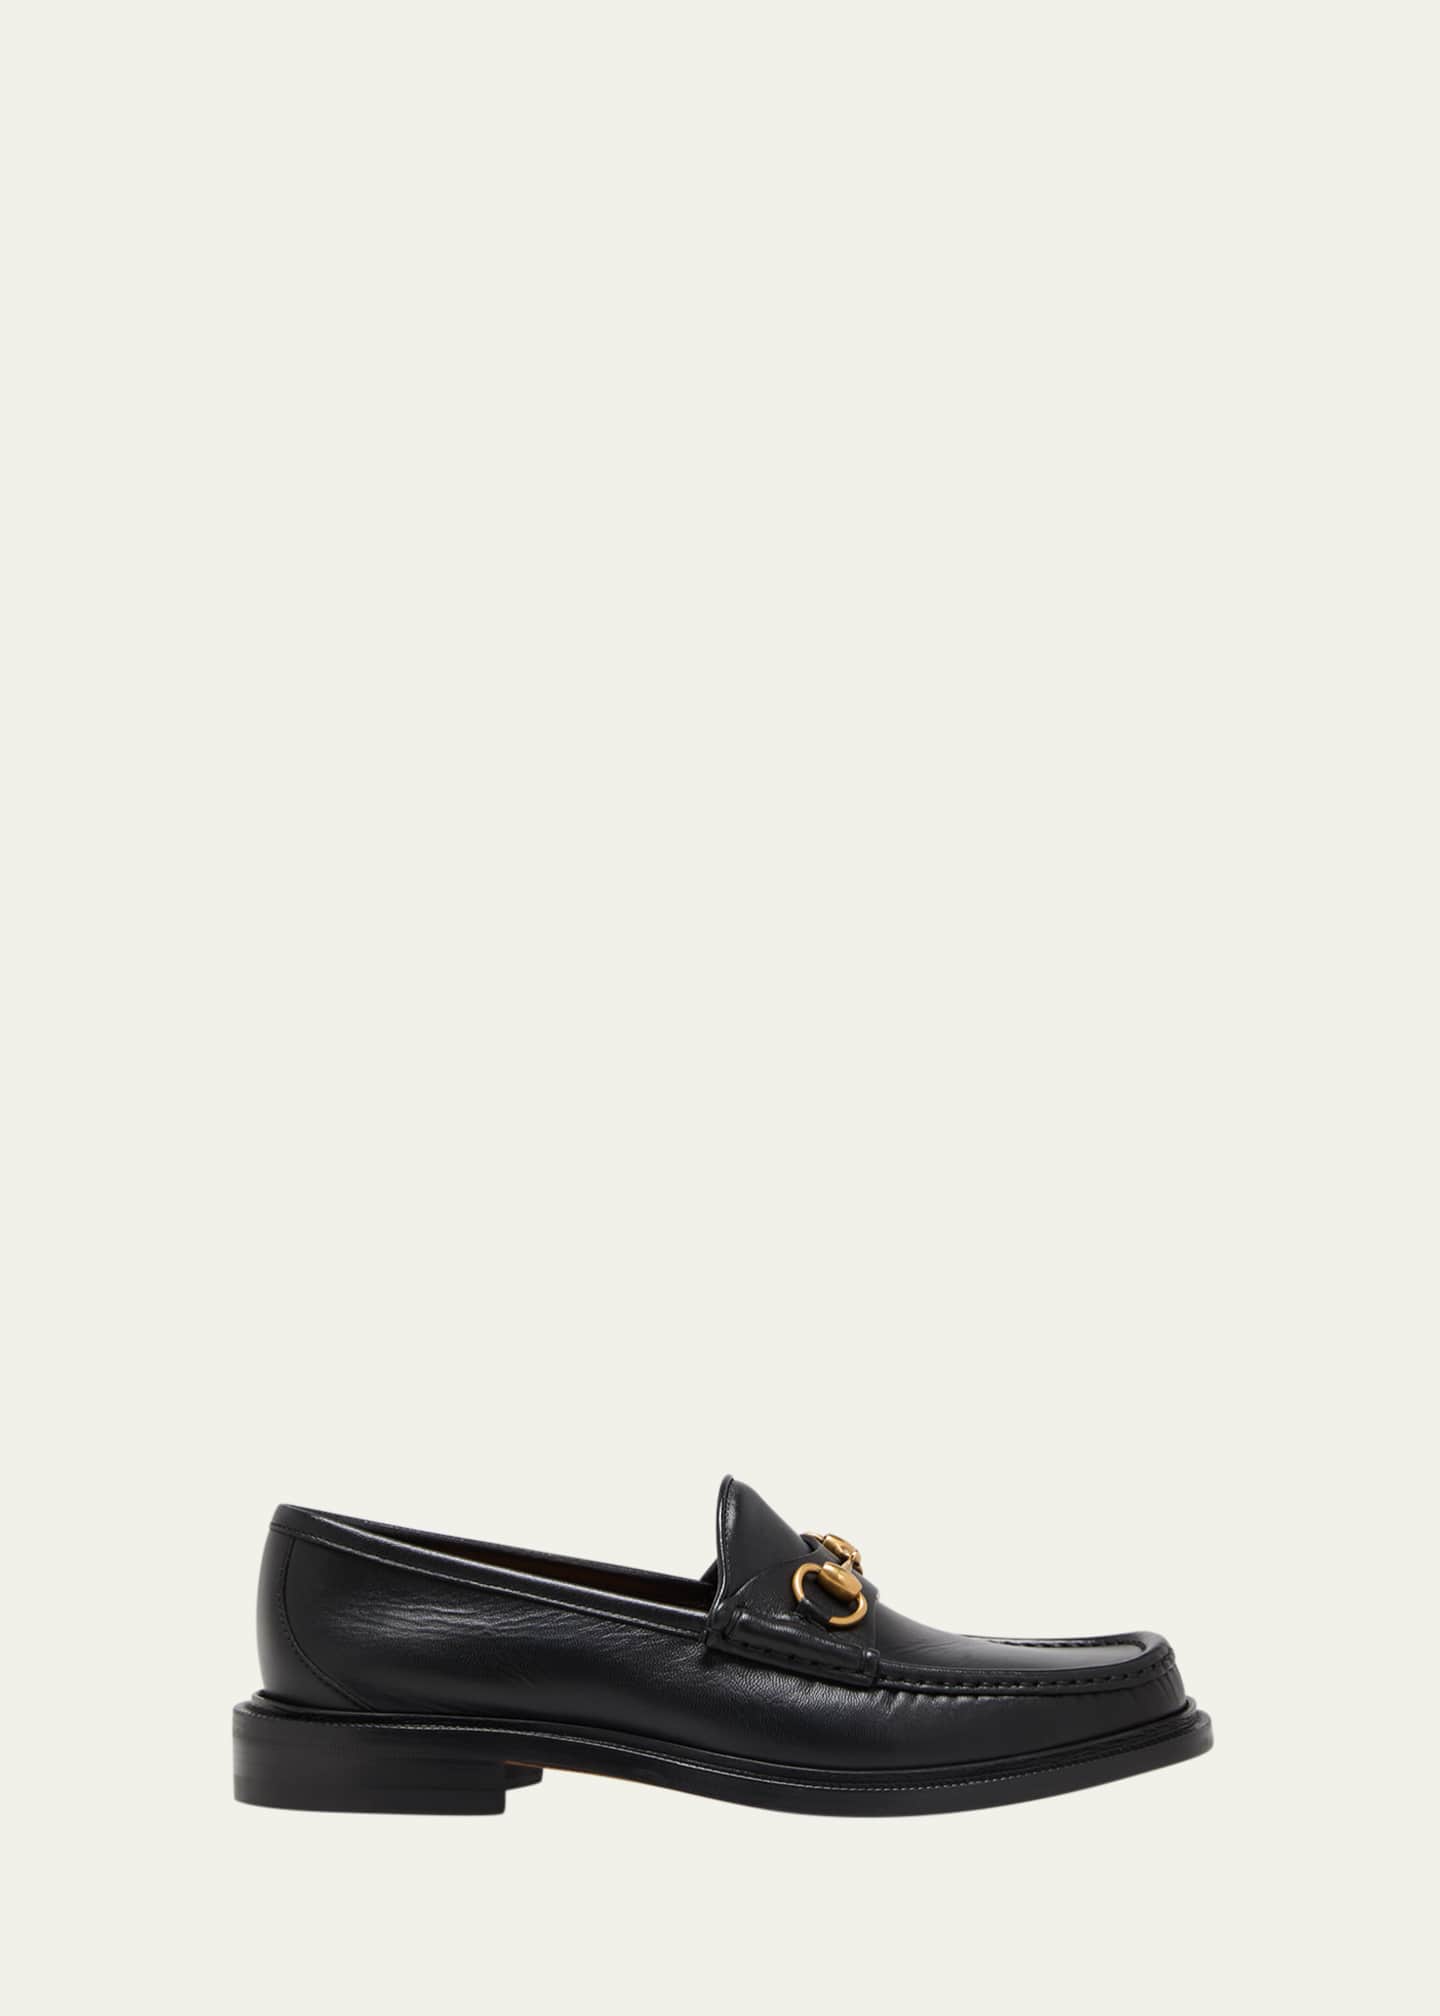 Gucci Men's Wislet Leather Bit Loafers - Bergdorf Goodman